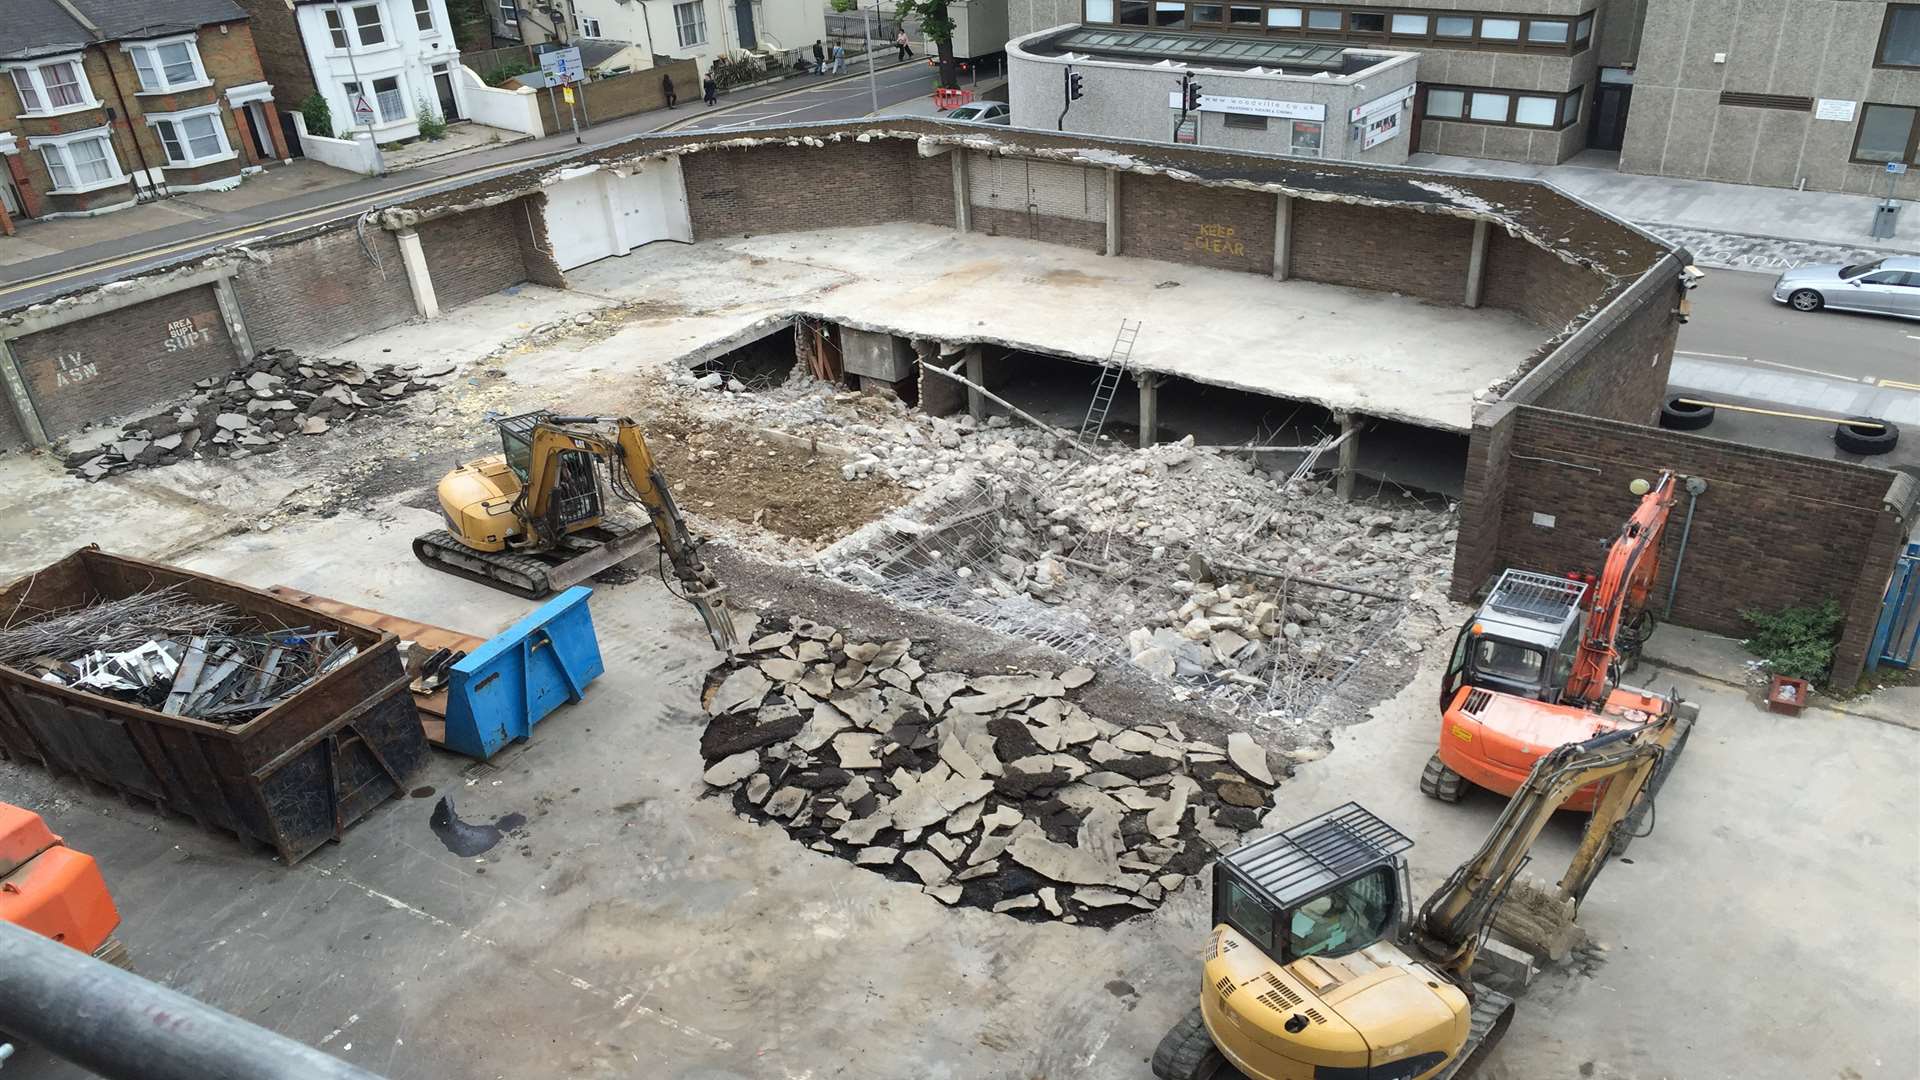 Gravesend's old police station has been demolished, with up to 96 flats/apartments set to replace it